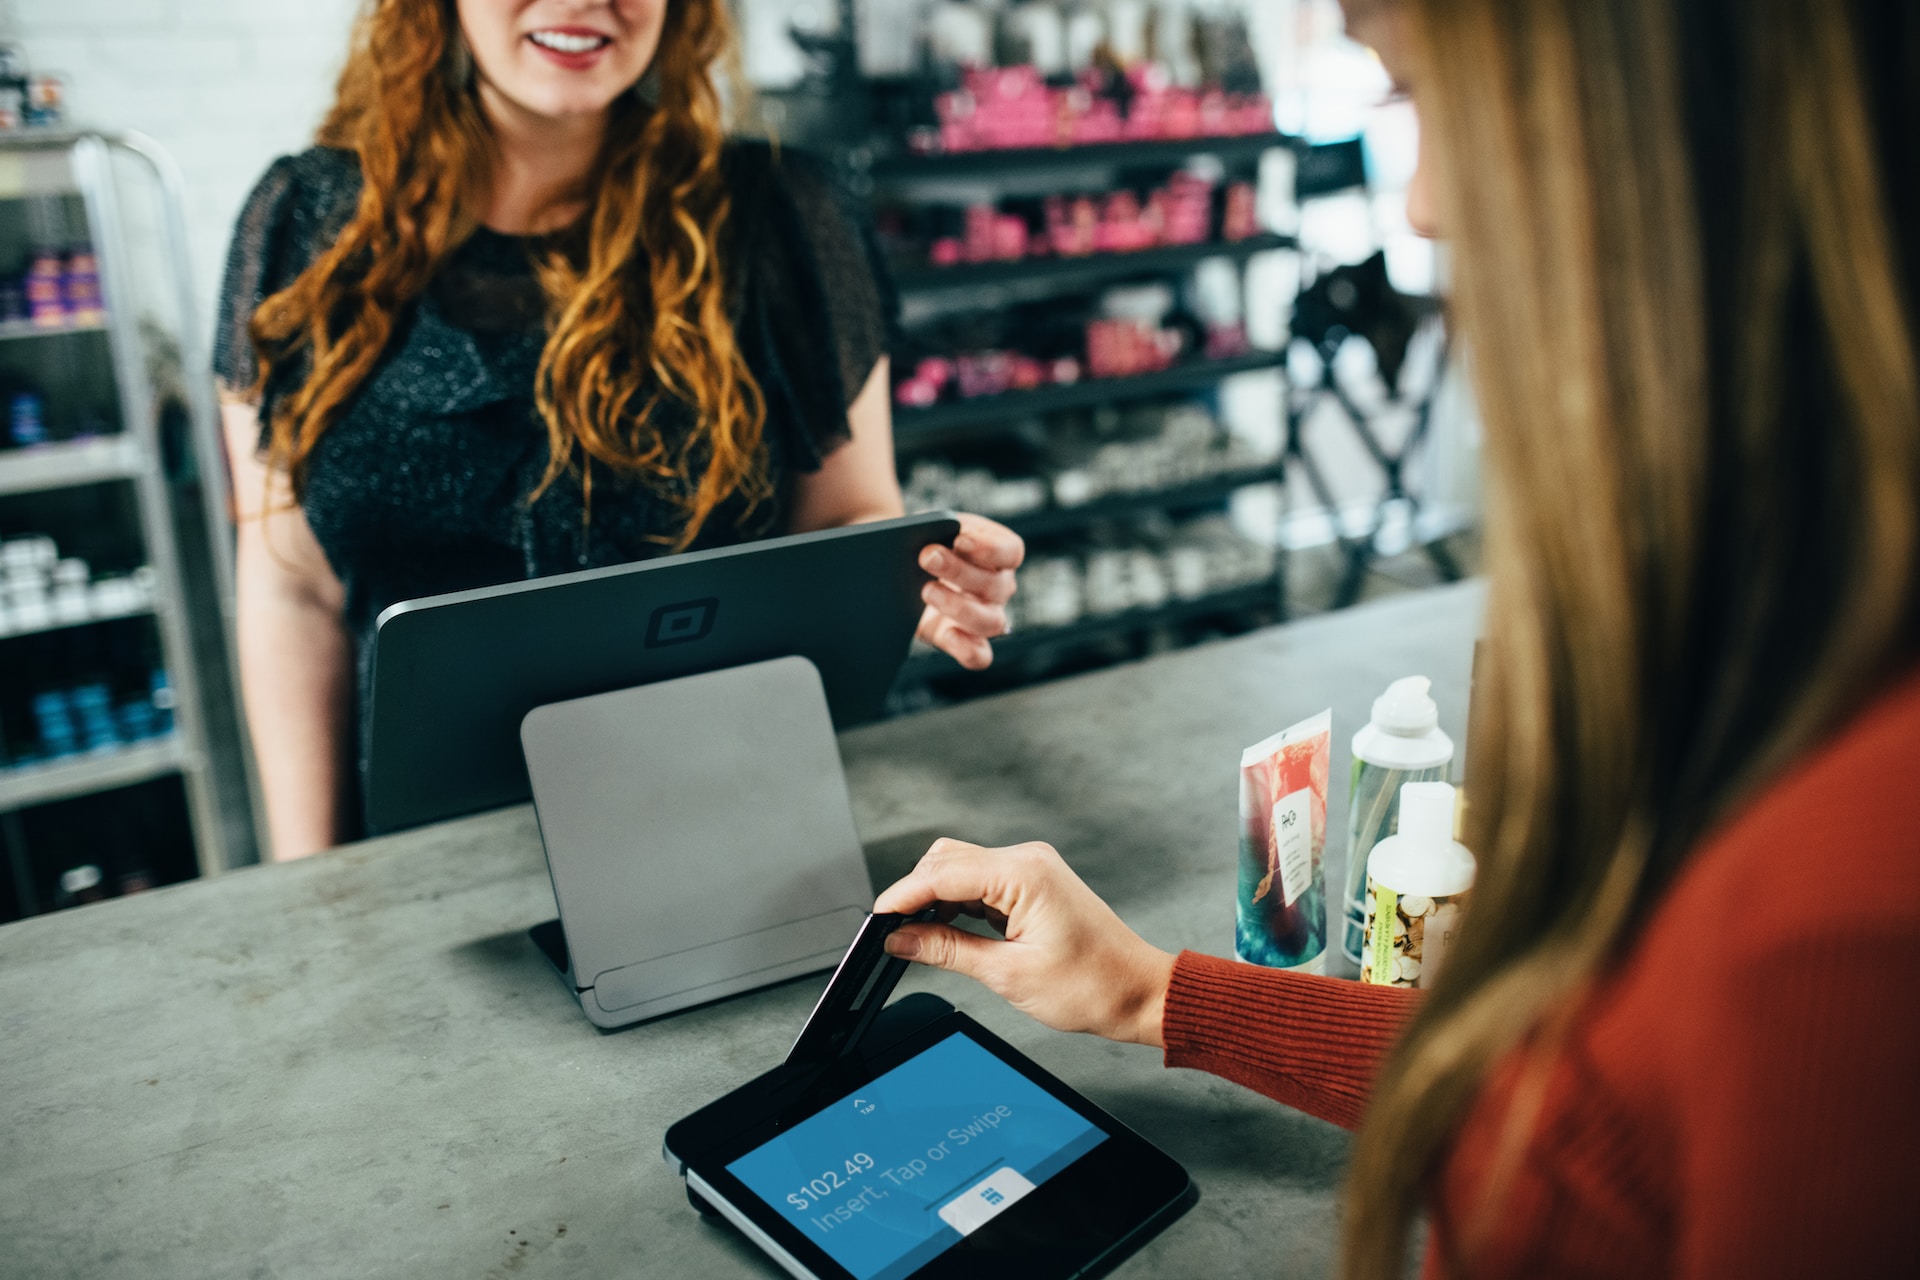 Using technology for payment at point of sale in restaurant